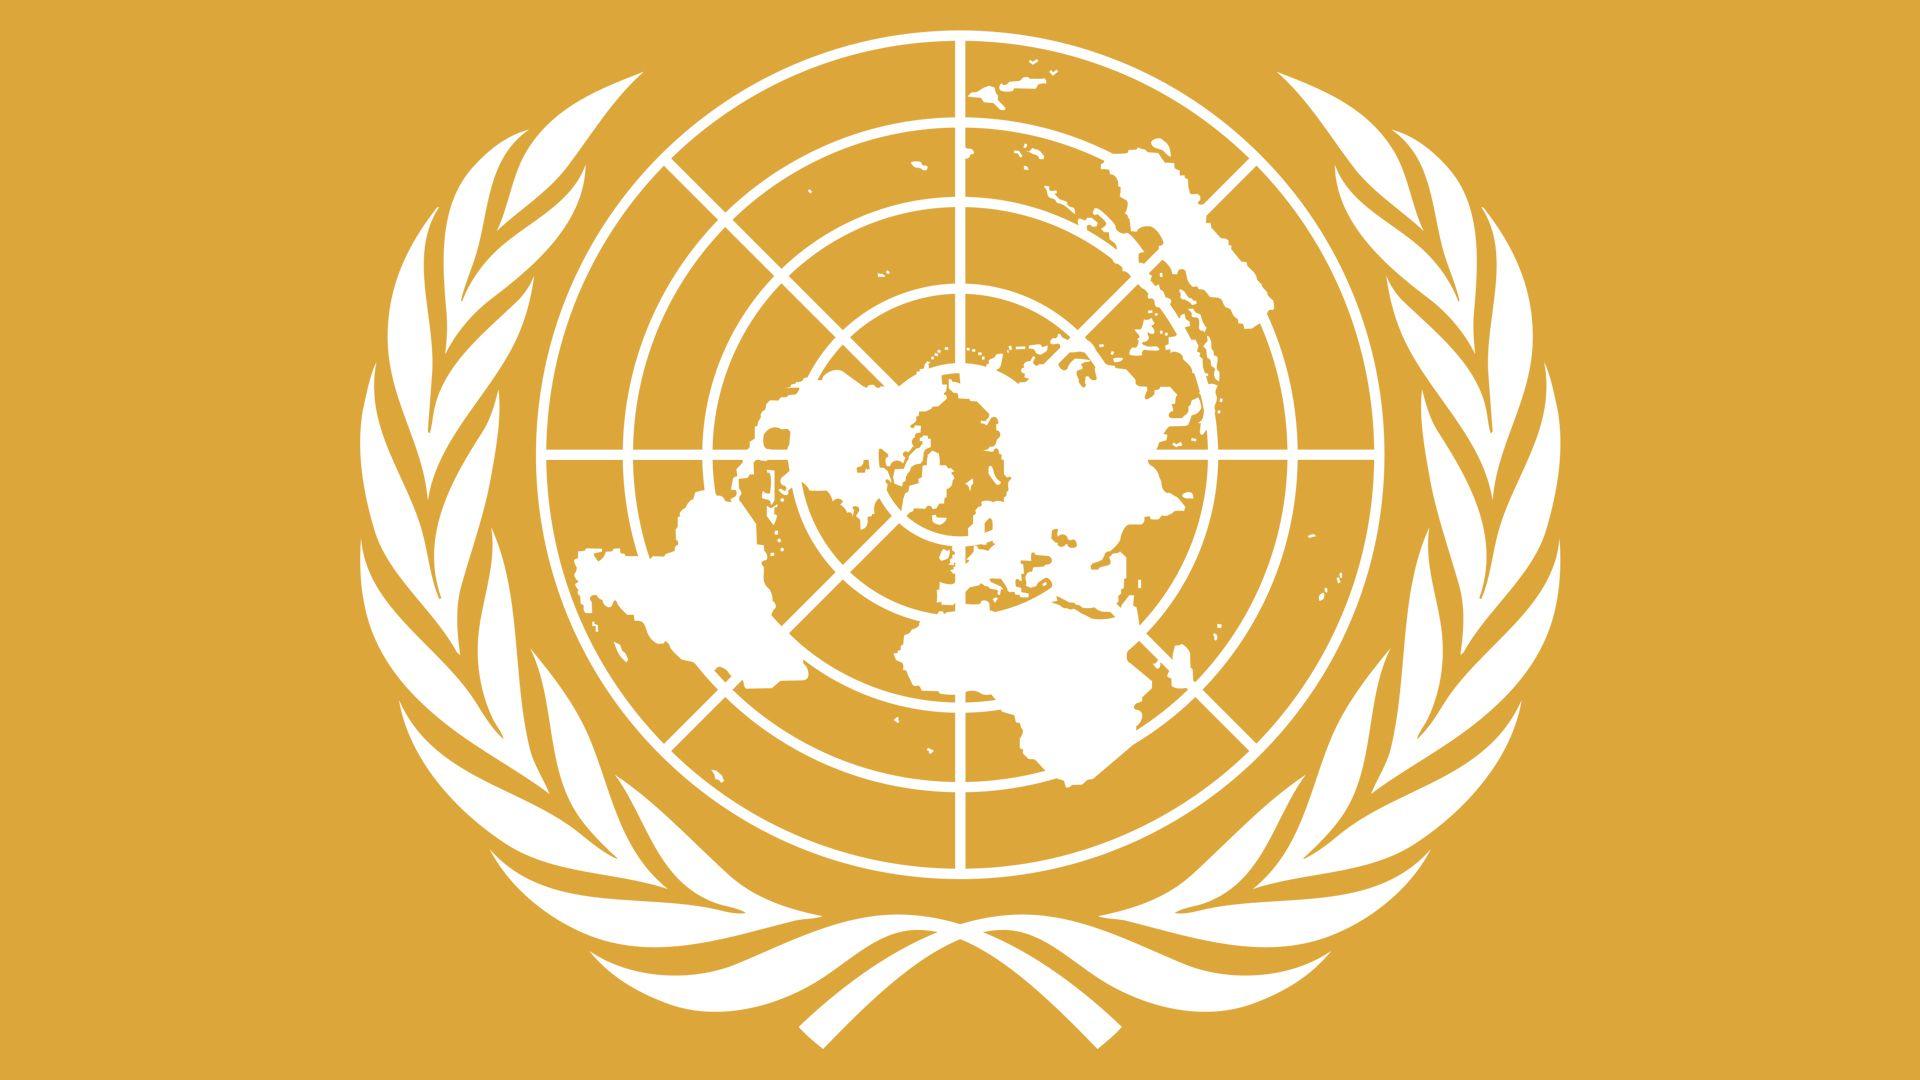 United Nations Logo - United Nations Logo, United Nations Symbol, Meaning, History and ...